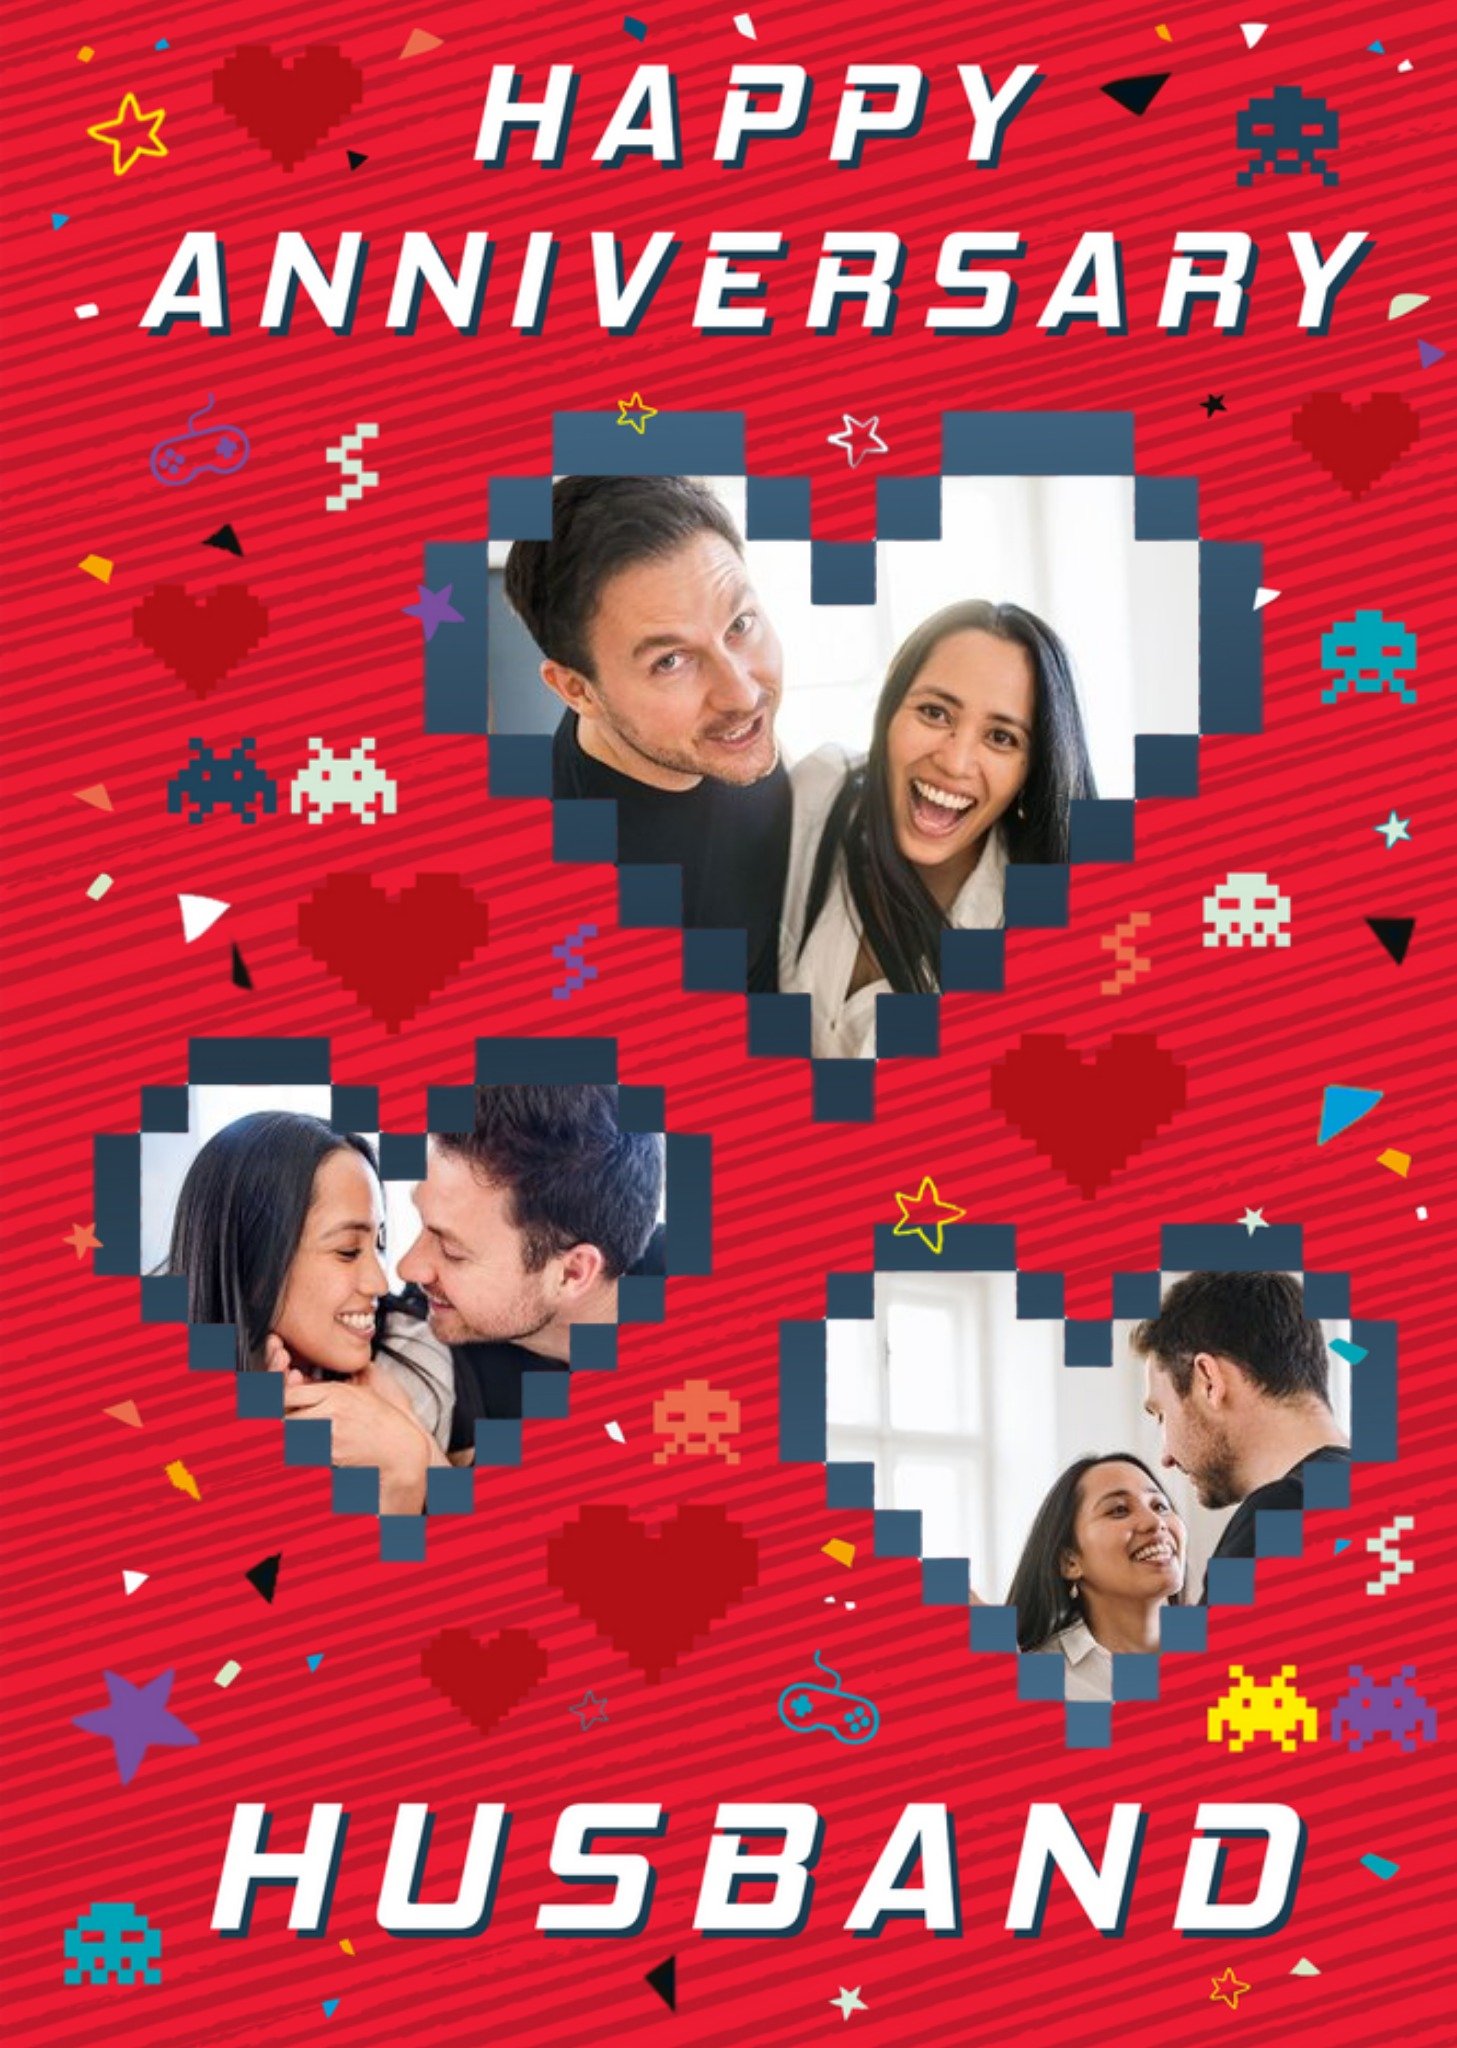 Other Axel Bright Graphic Gaming Happy Anniversary Husband Multi Photo Upload Card, Large